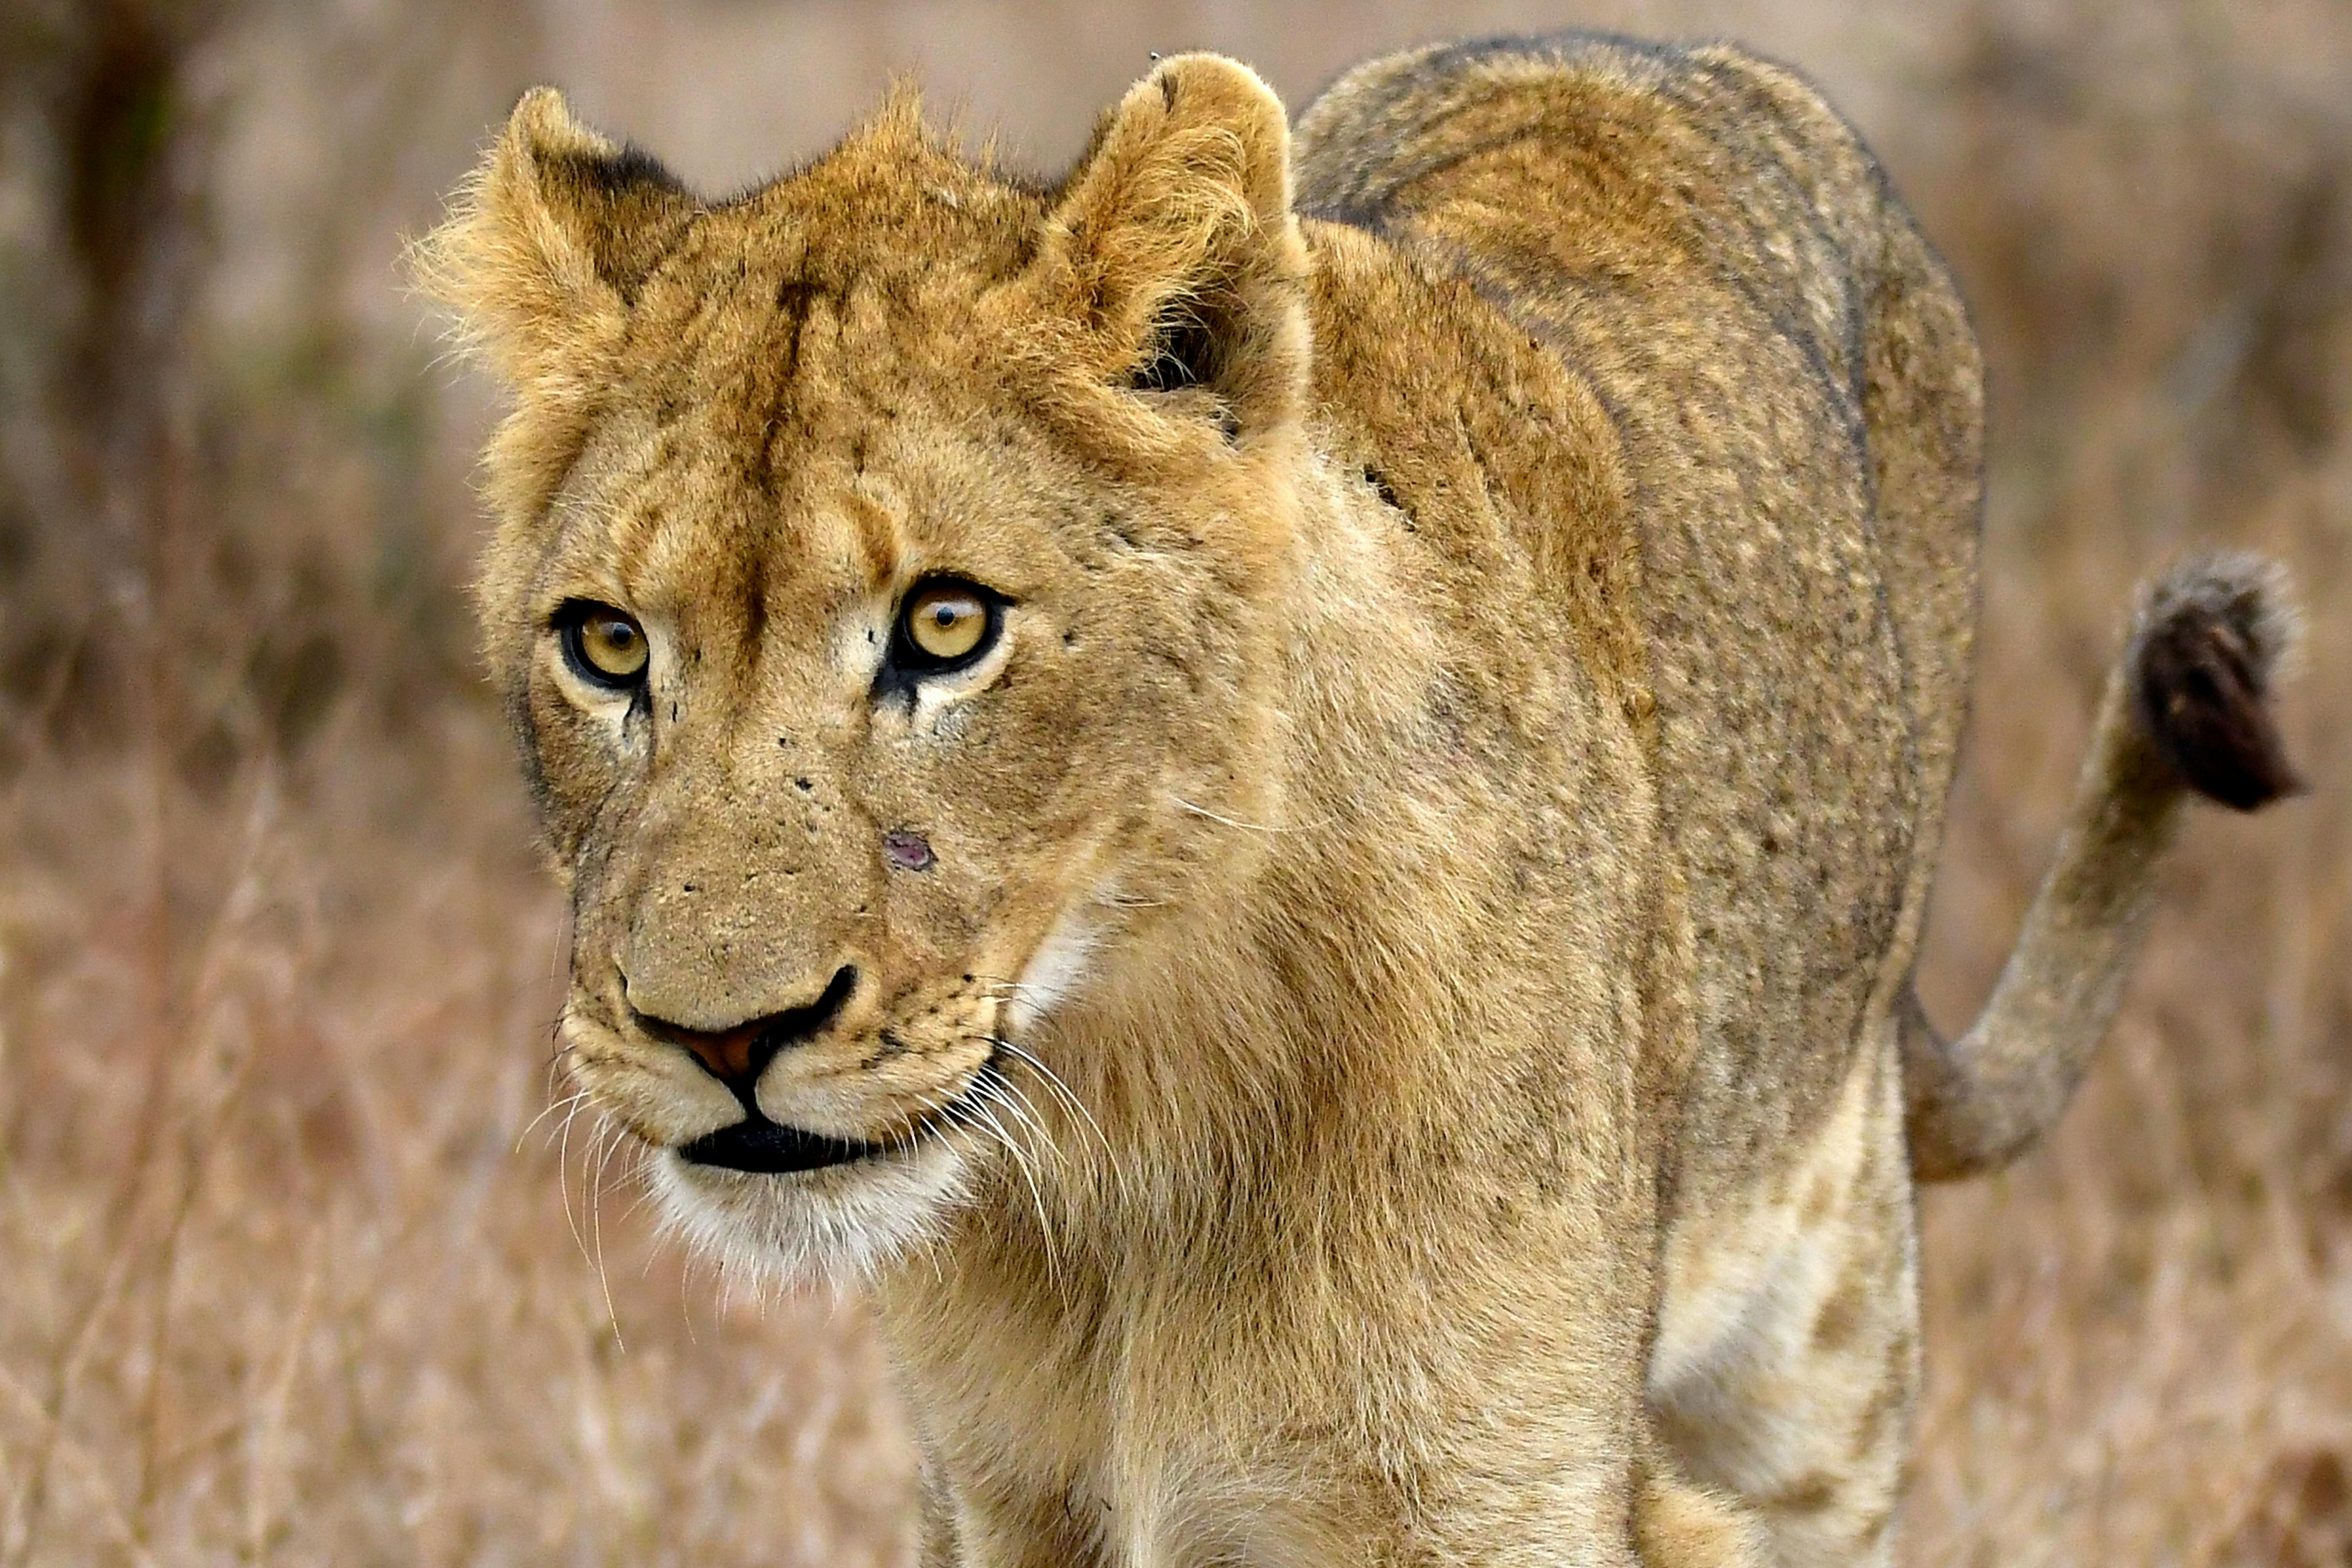 Investigating the presence of West African lions in Sierra Leone